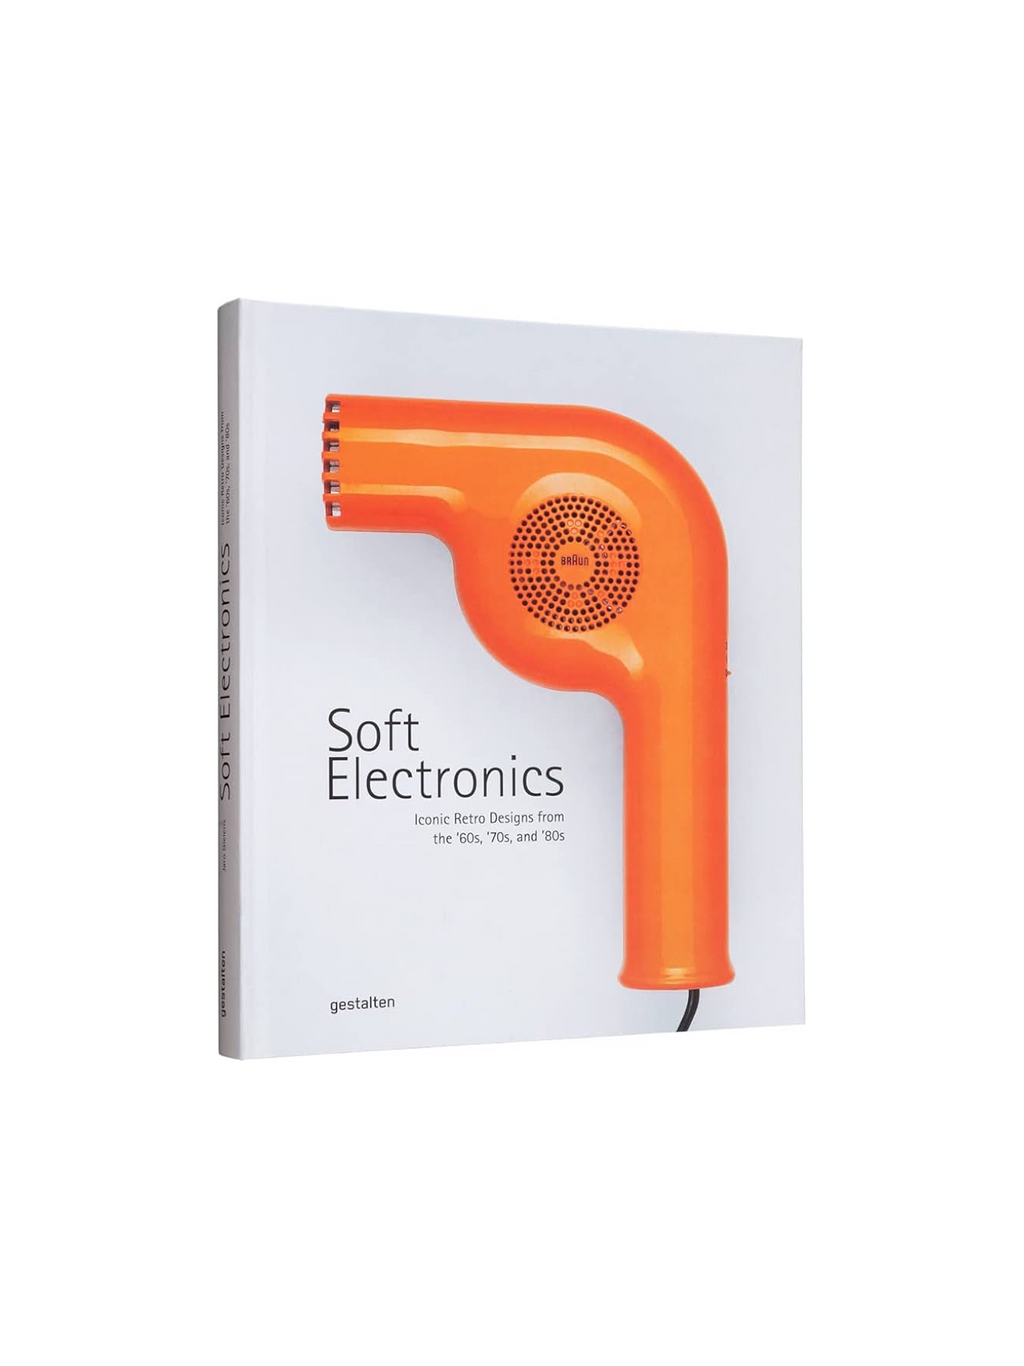 Soft Electronics: Iconic Retro Design for Household Products in the 60s, 70s, and 80s